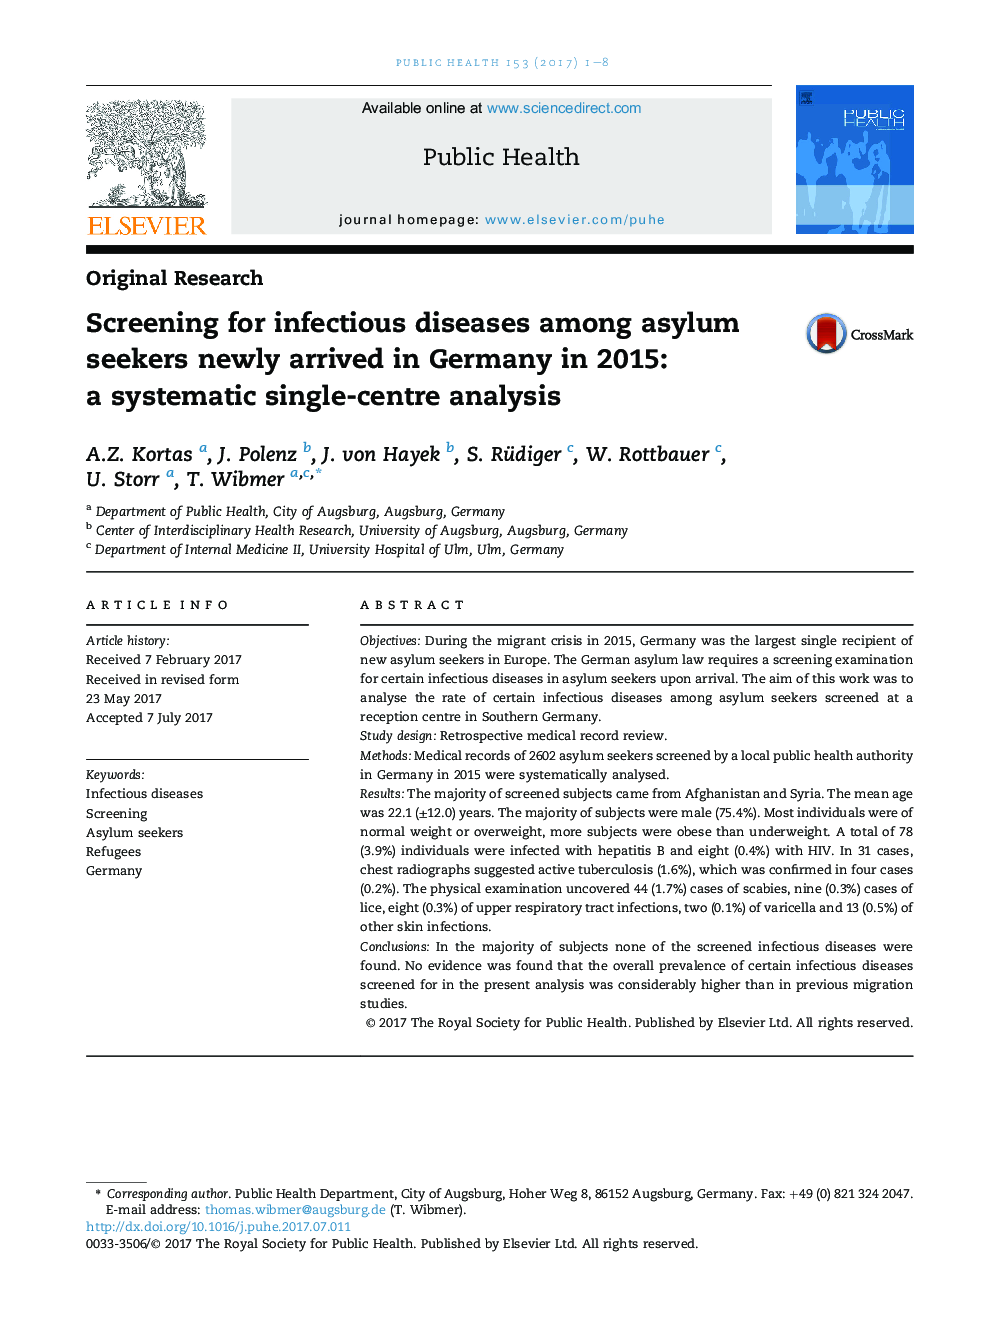 Screening for infectious diseases among asylum seekers newly arrived in Germany in 2015: aÂ systematic single-centre analysis